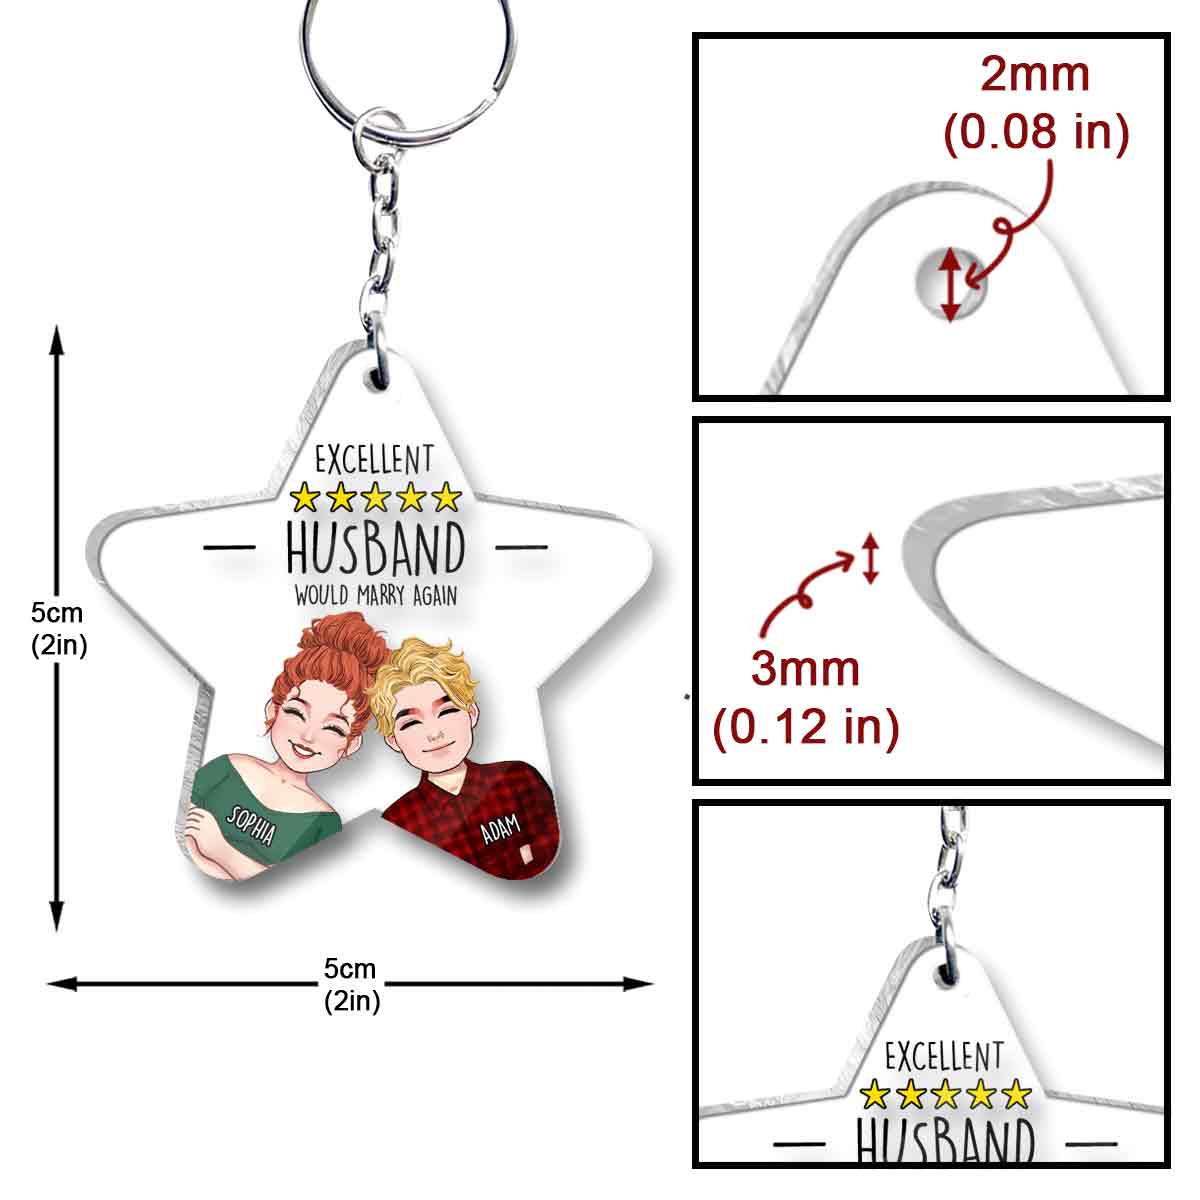 Excellent Husband Wife Five Stars - Personalized Husband And Wife Transparent Keychain